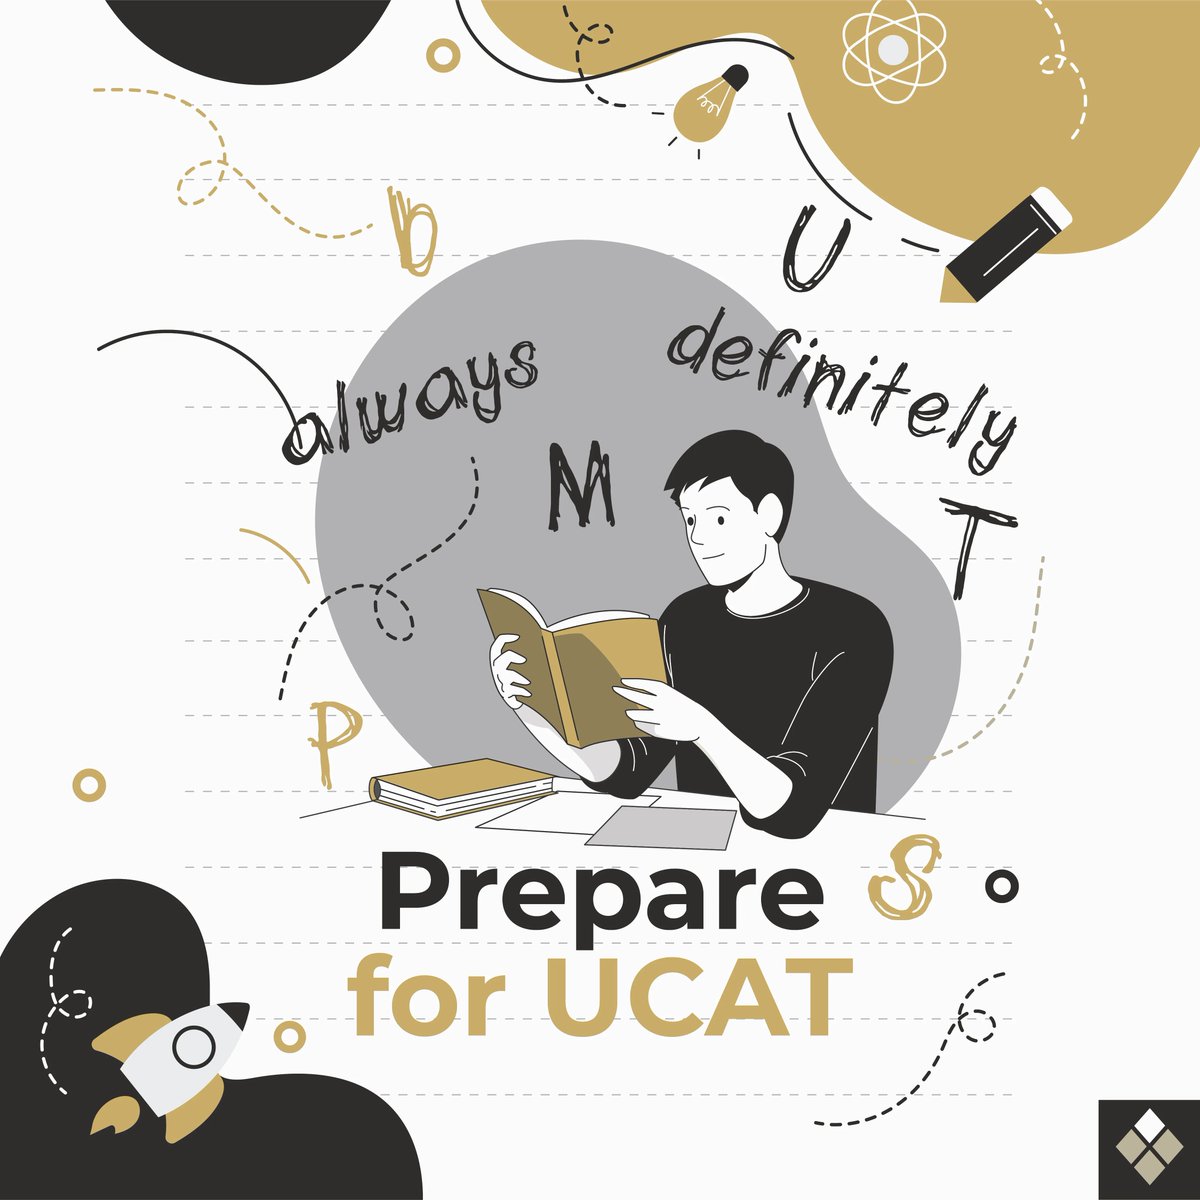 Preparing for UCAT Verbal Reasoning can be difficult, especially for students who are more interested in the sciences. Find out how to approach this section by hitting the link below!

#medicine #ucat